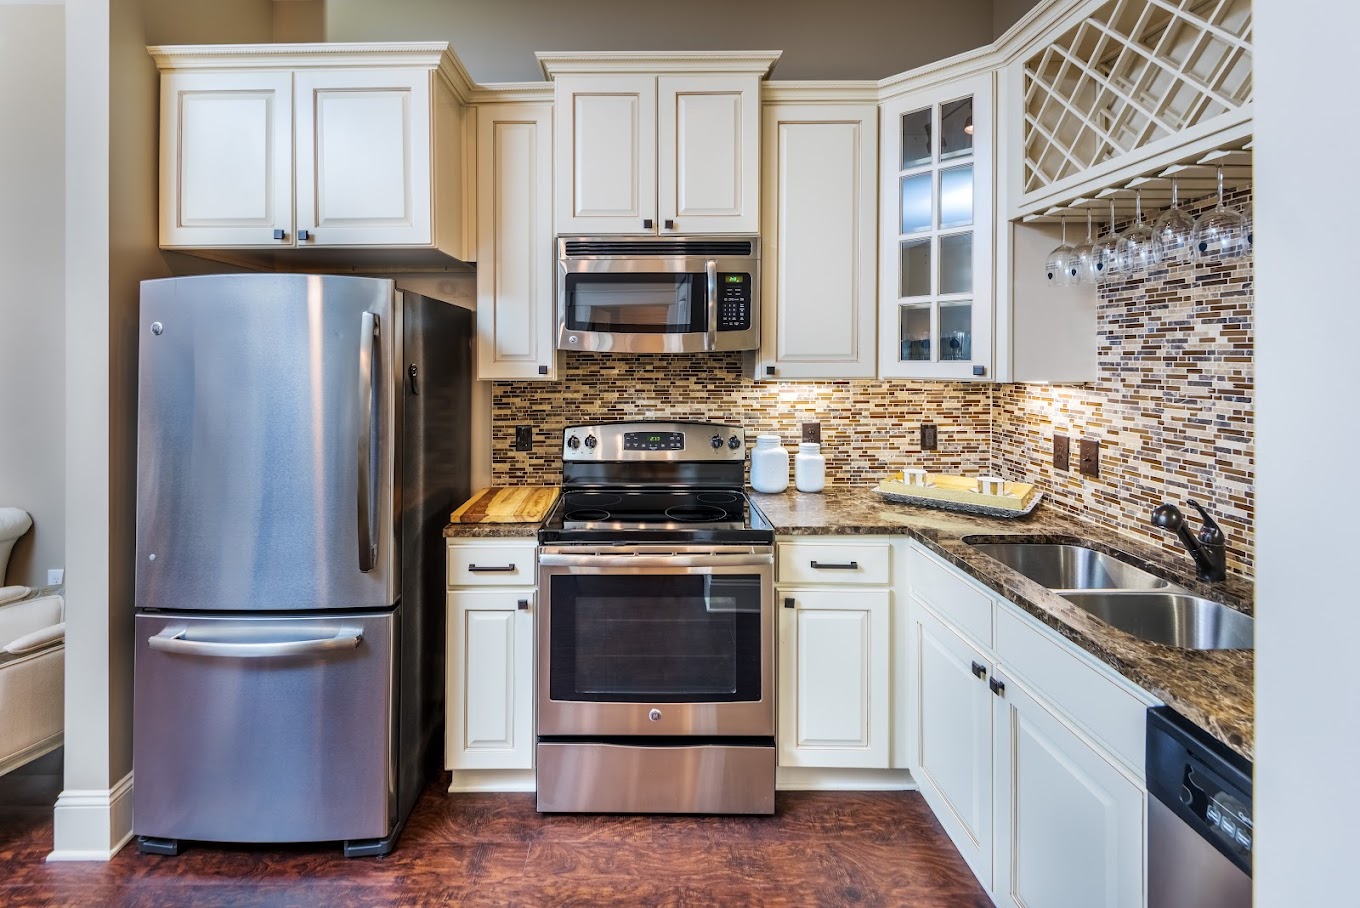 Luxury Plank Flooring, Marble Countertops, Large Islands, Custom Cabinetry, Oil Rubbed Bronze Finishes, Stainless Steel Appliances, Kitchen Pantries